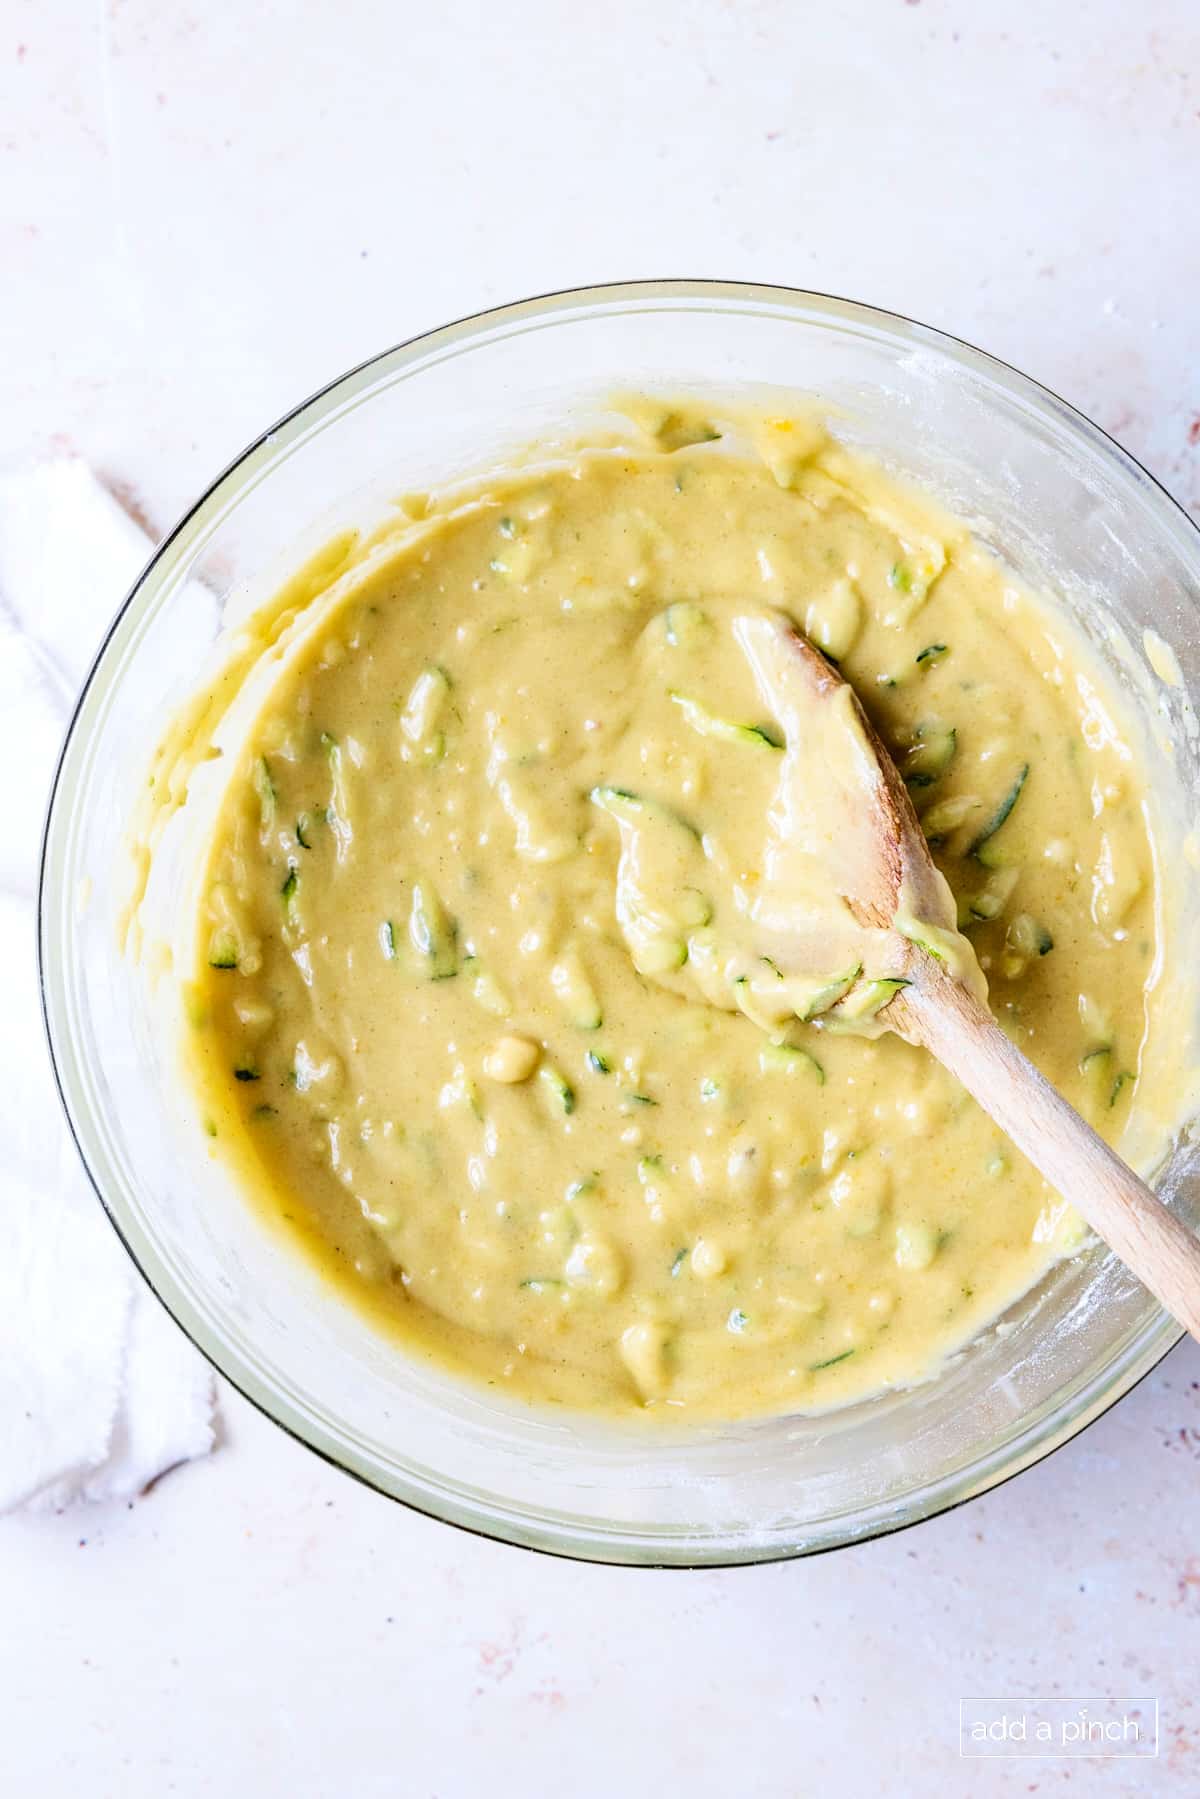 Zucchini bread batter in a glass bowl with a wooden spoon